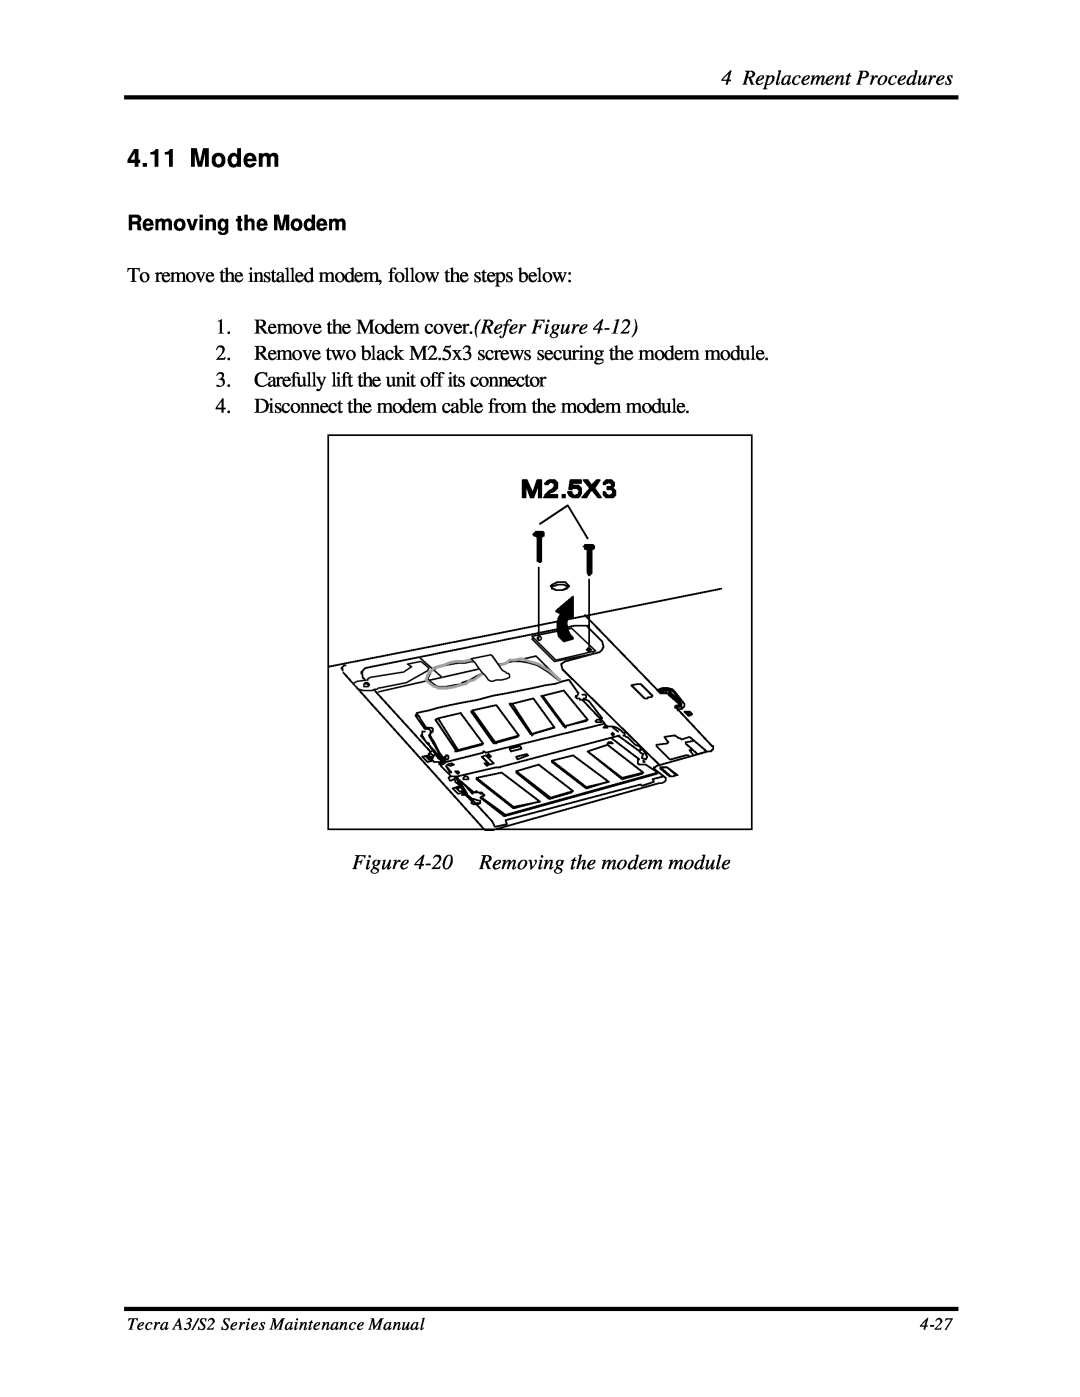 Toshiba S2 manual Removing the Modem, 20 Removing the modem module, Replacement Procedures, 4-27 